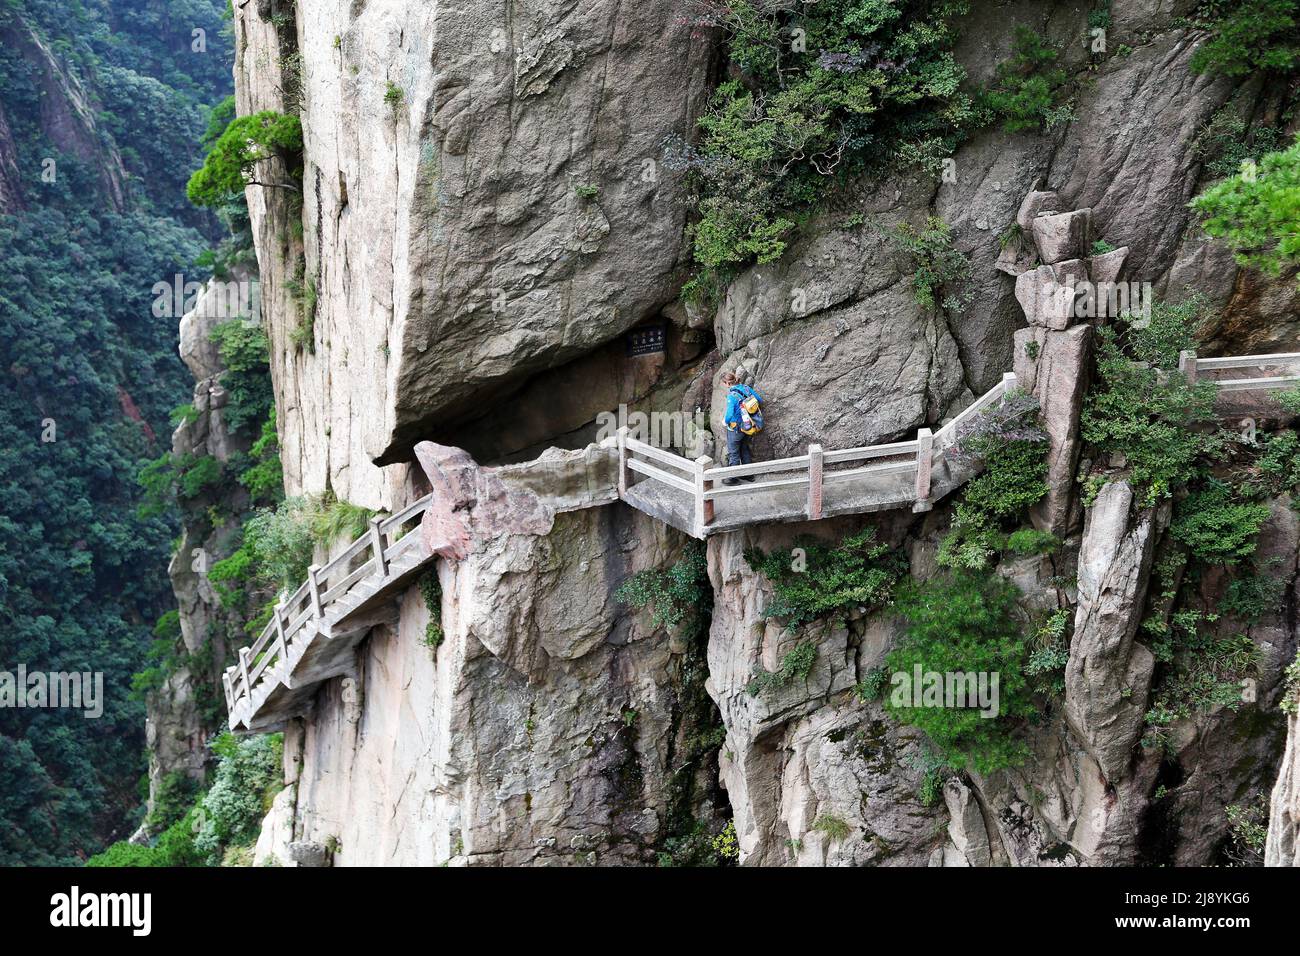 Huangshan, China - September 25, 2014: Steep passage on the Huang Shan Mountain, China. Huangshan is a famous national park in China Stock Photo